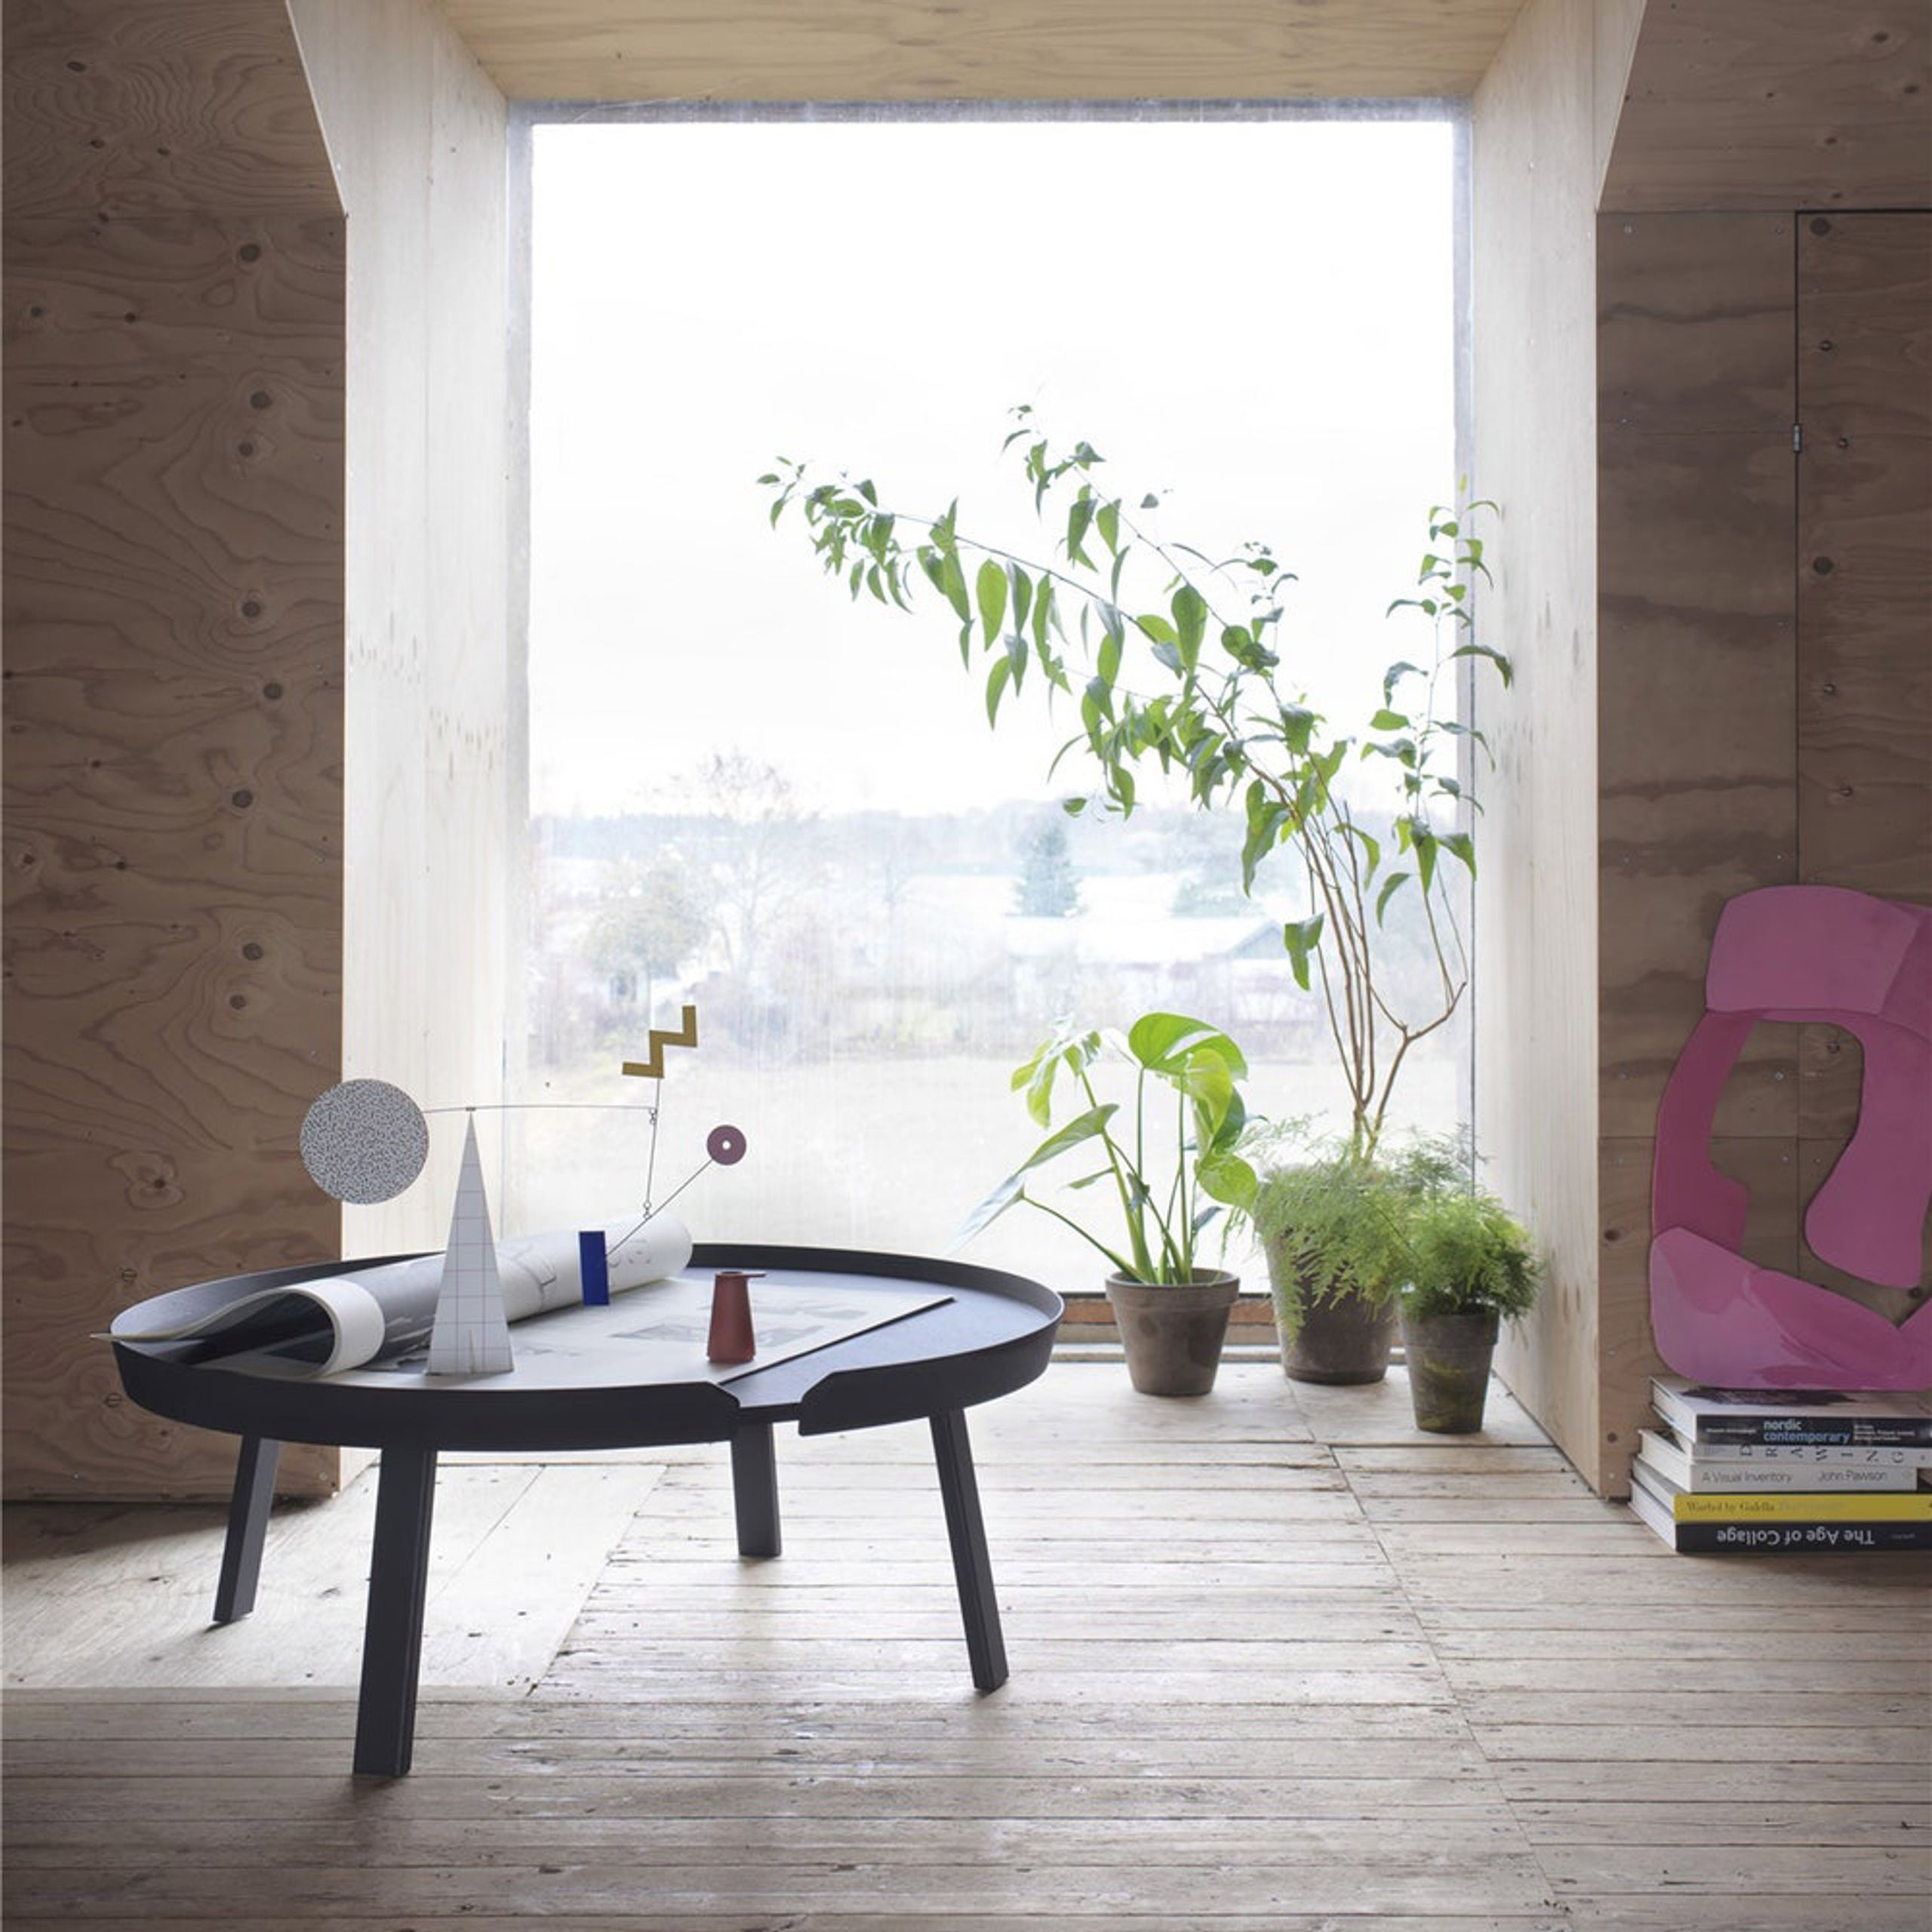 Muuto - Conseil d'administration - The Around Coffee Large Table - Anthracite